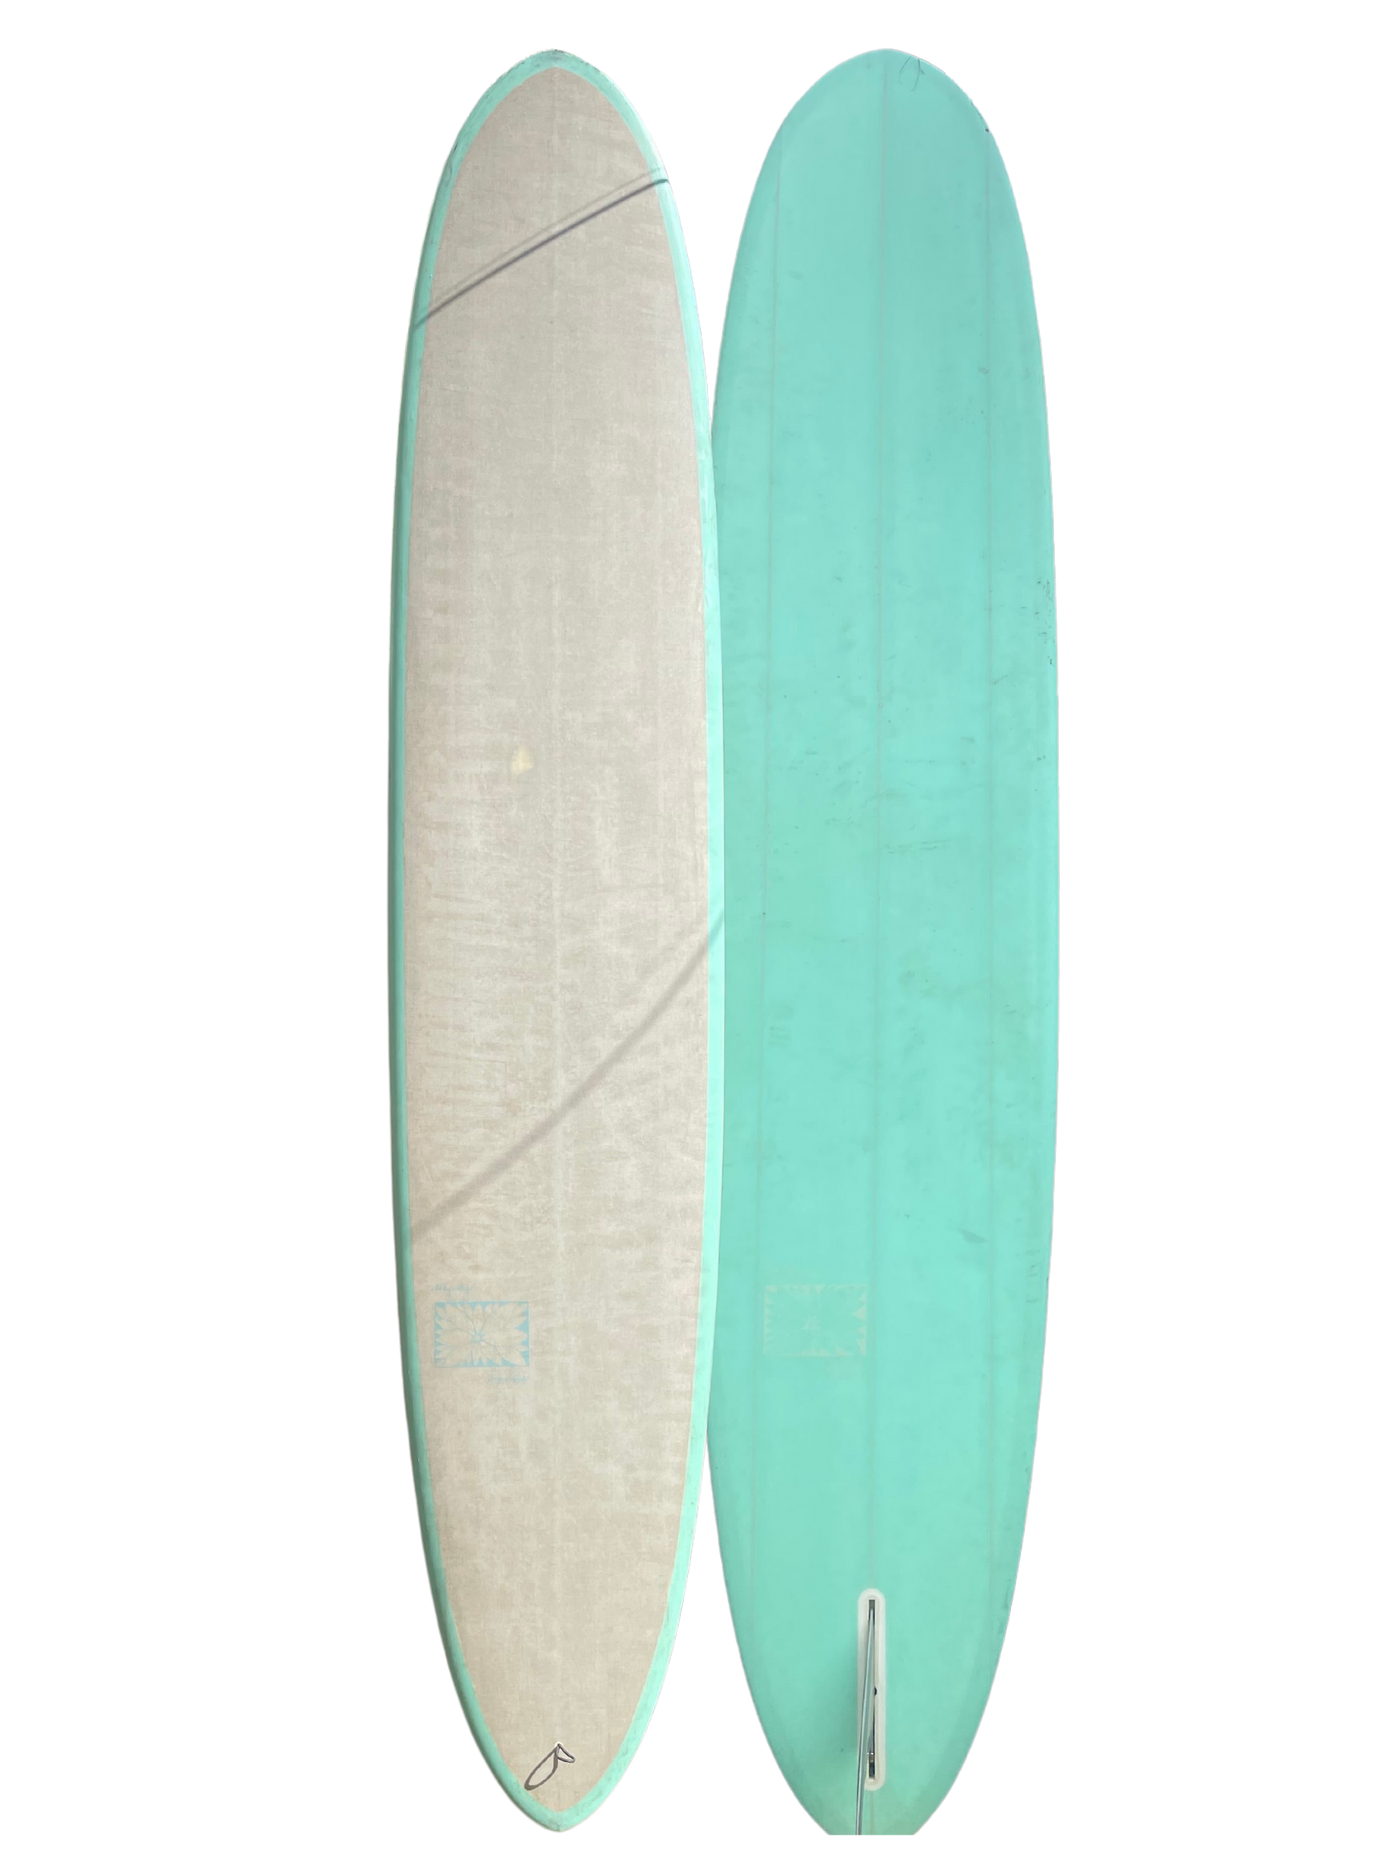 USED 10' Classic Pintail